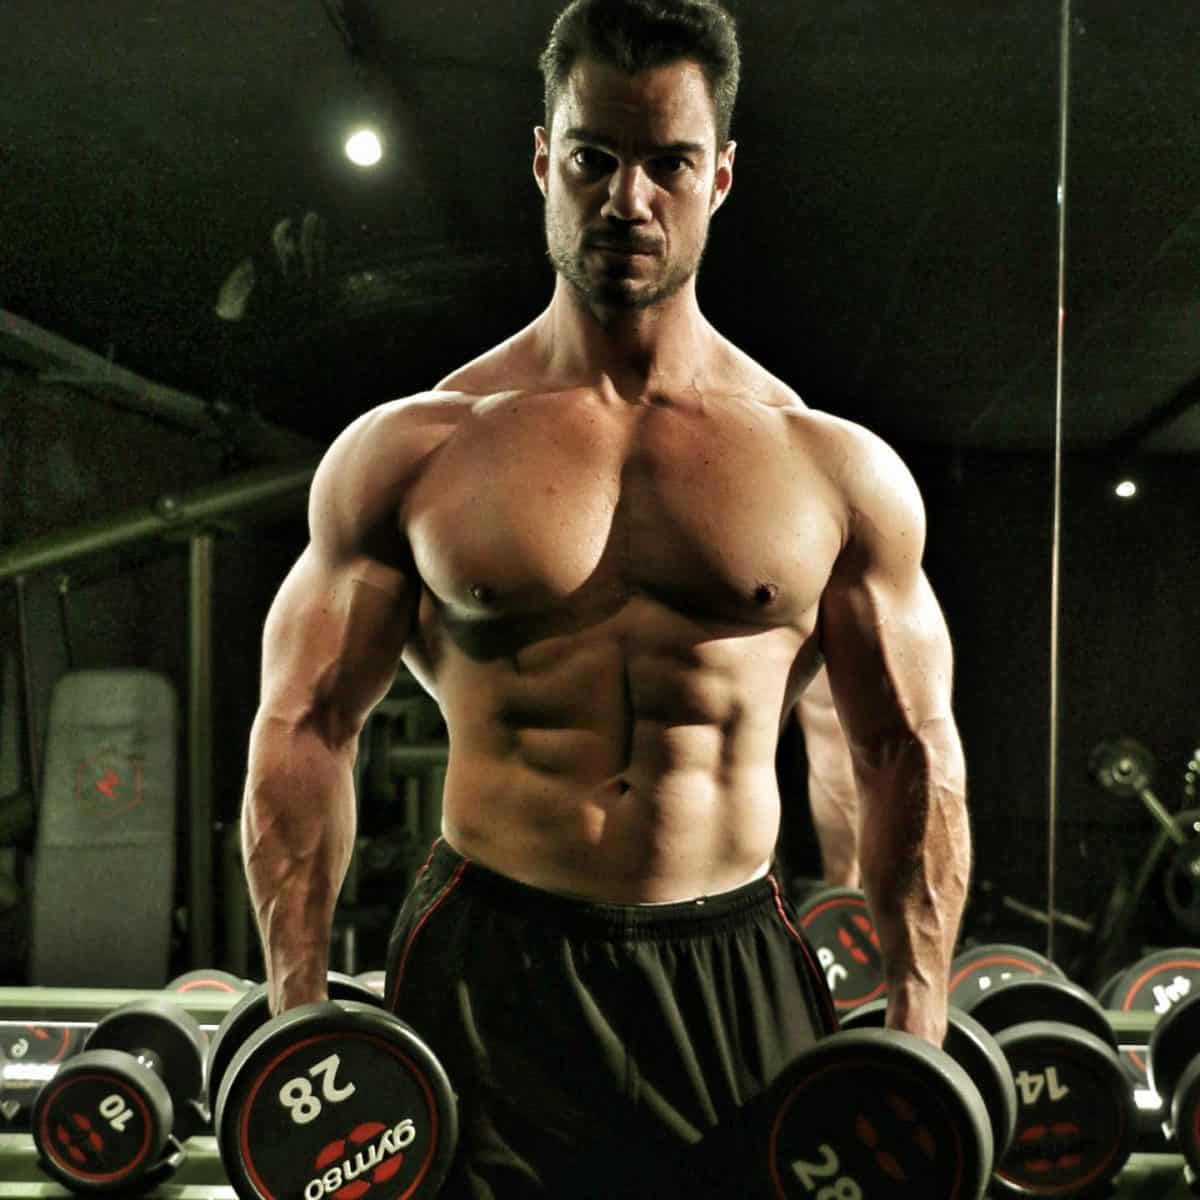 Julien Quaglierini shirtless with dumbbells in his hands.